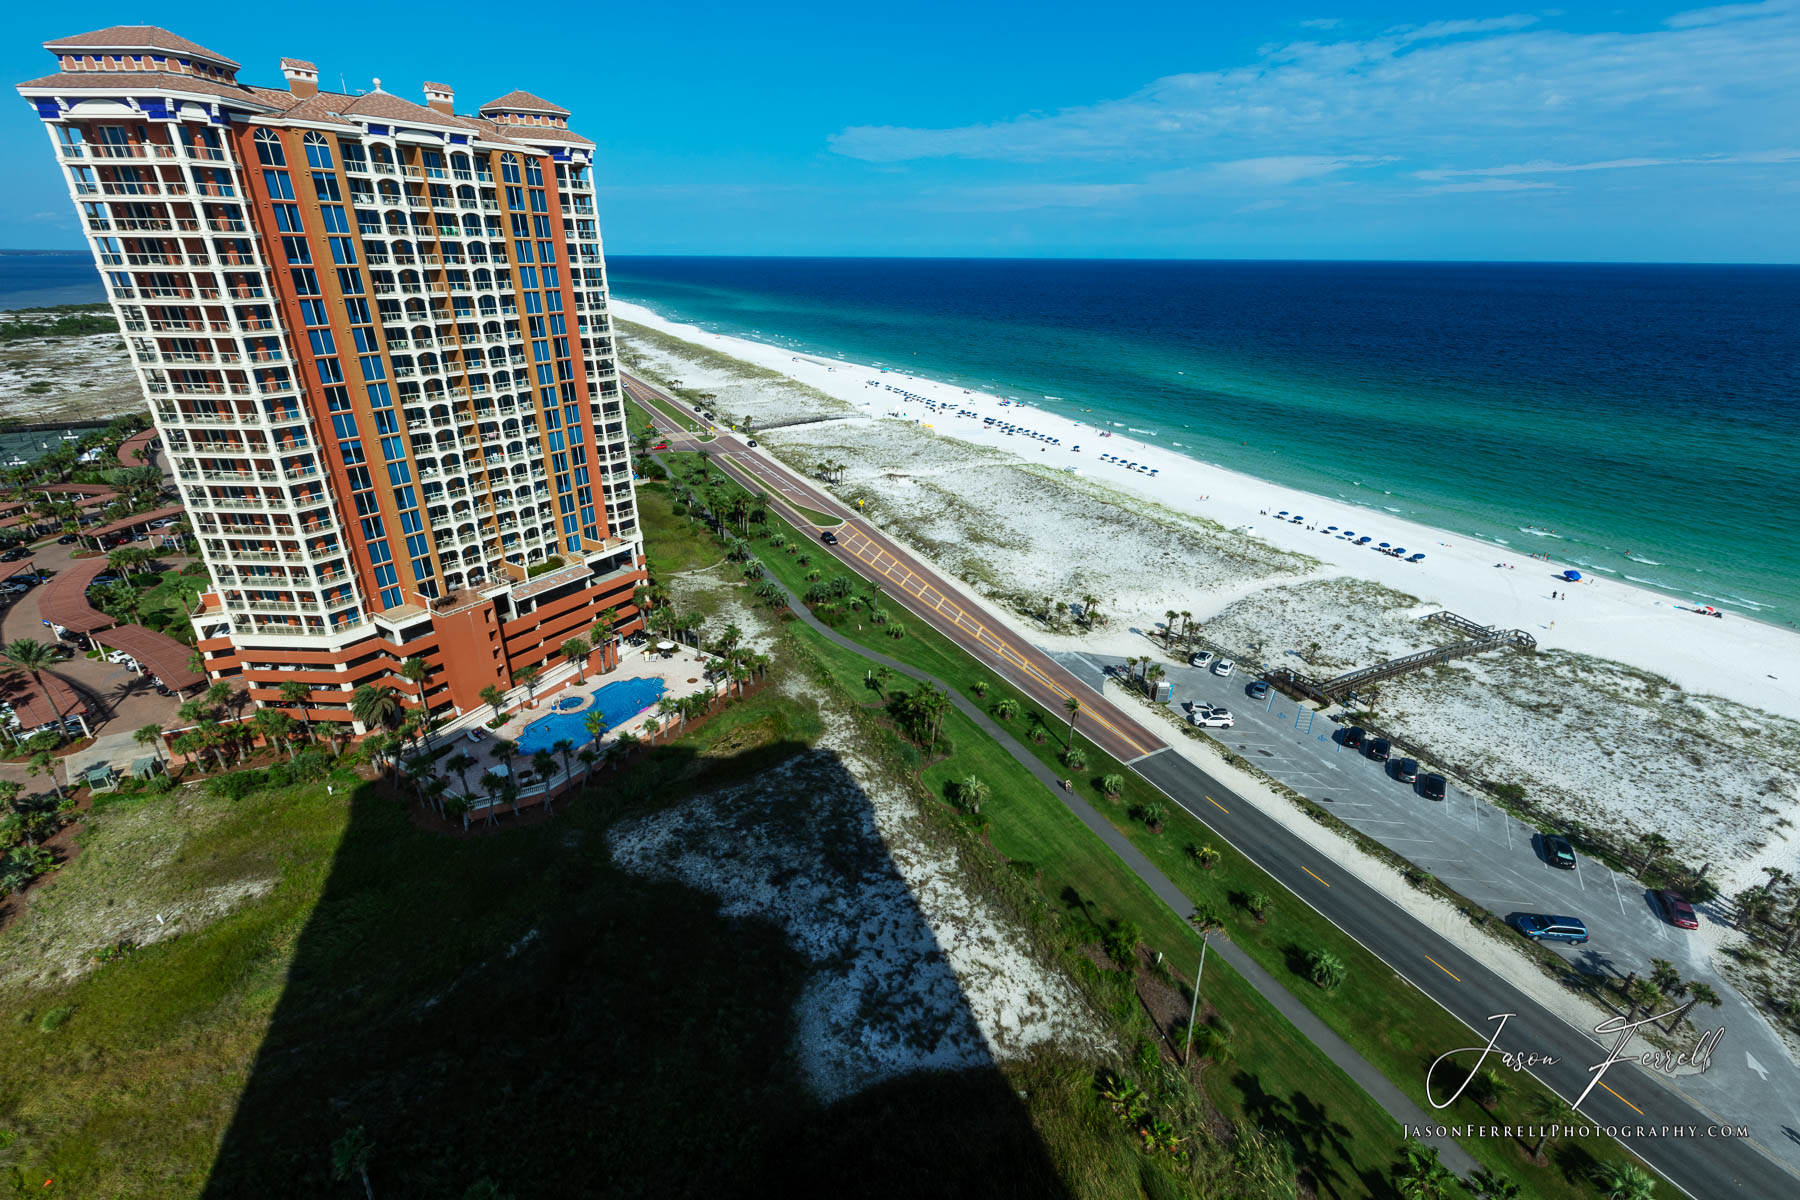 A photo of the Portofino Island Resort Towers, the beach, the highway and the Gulf of Mexico.